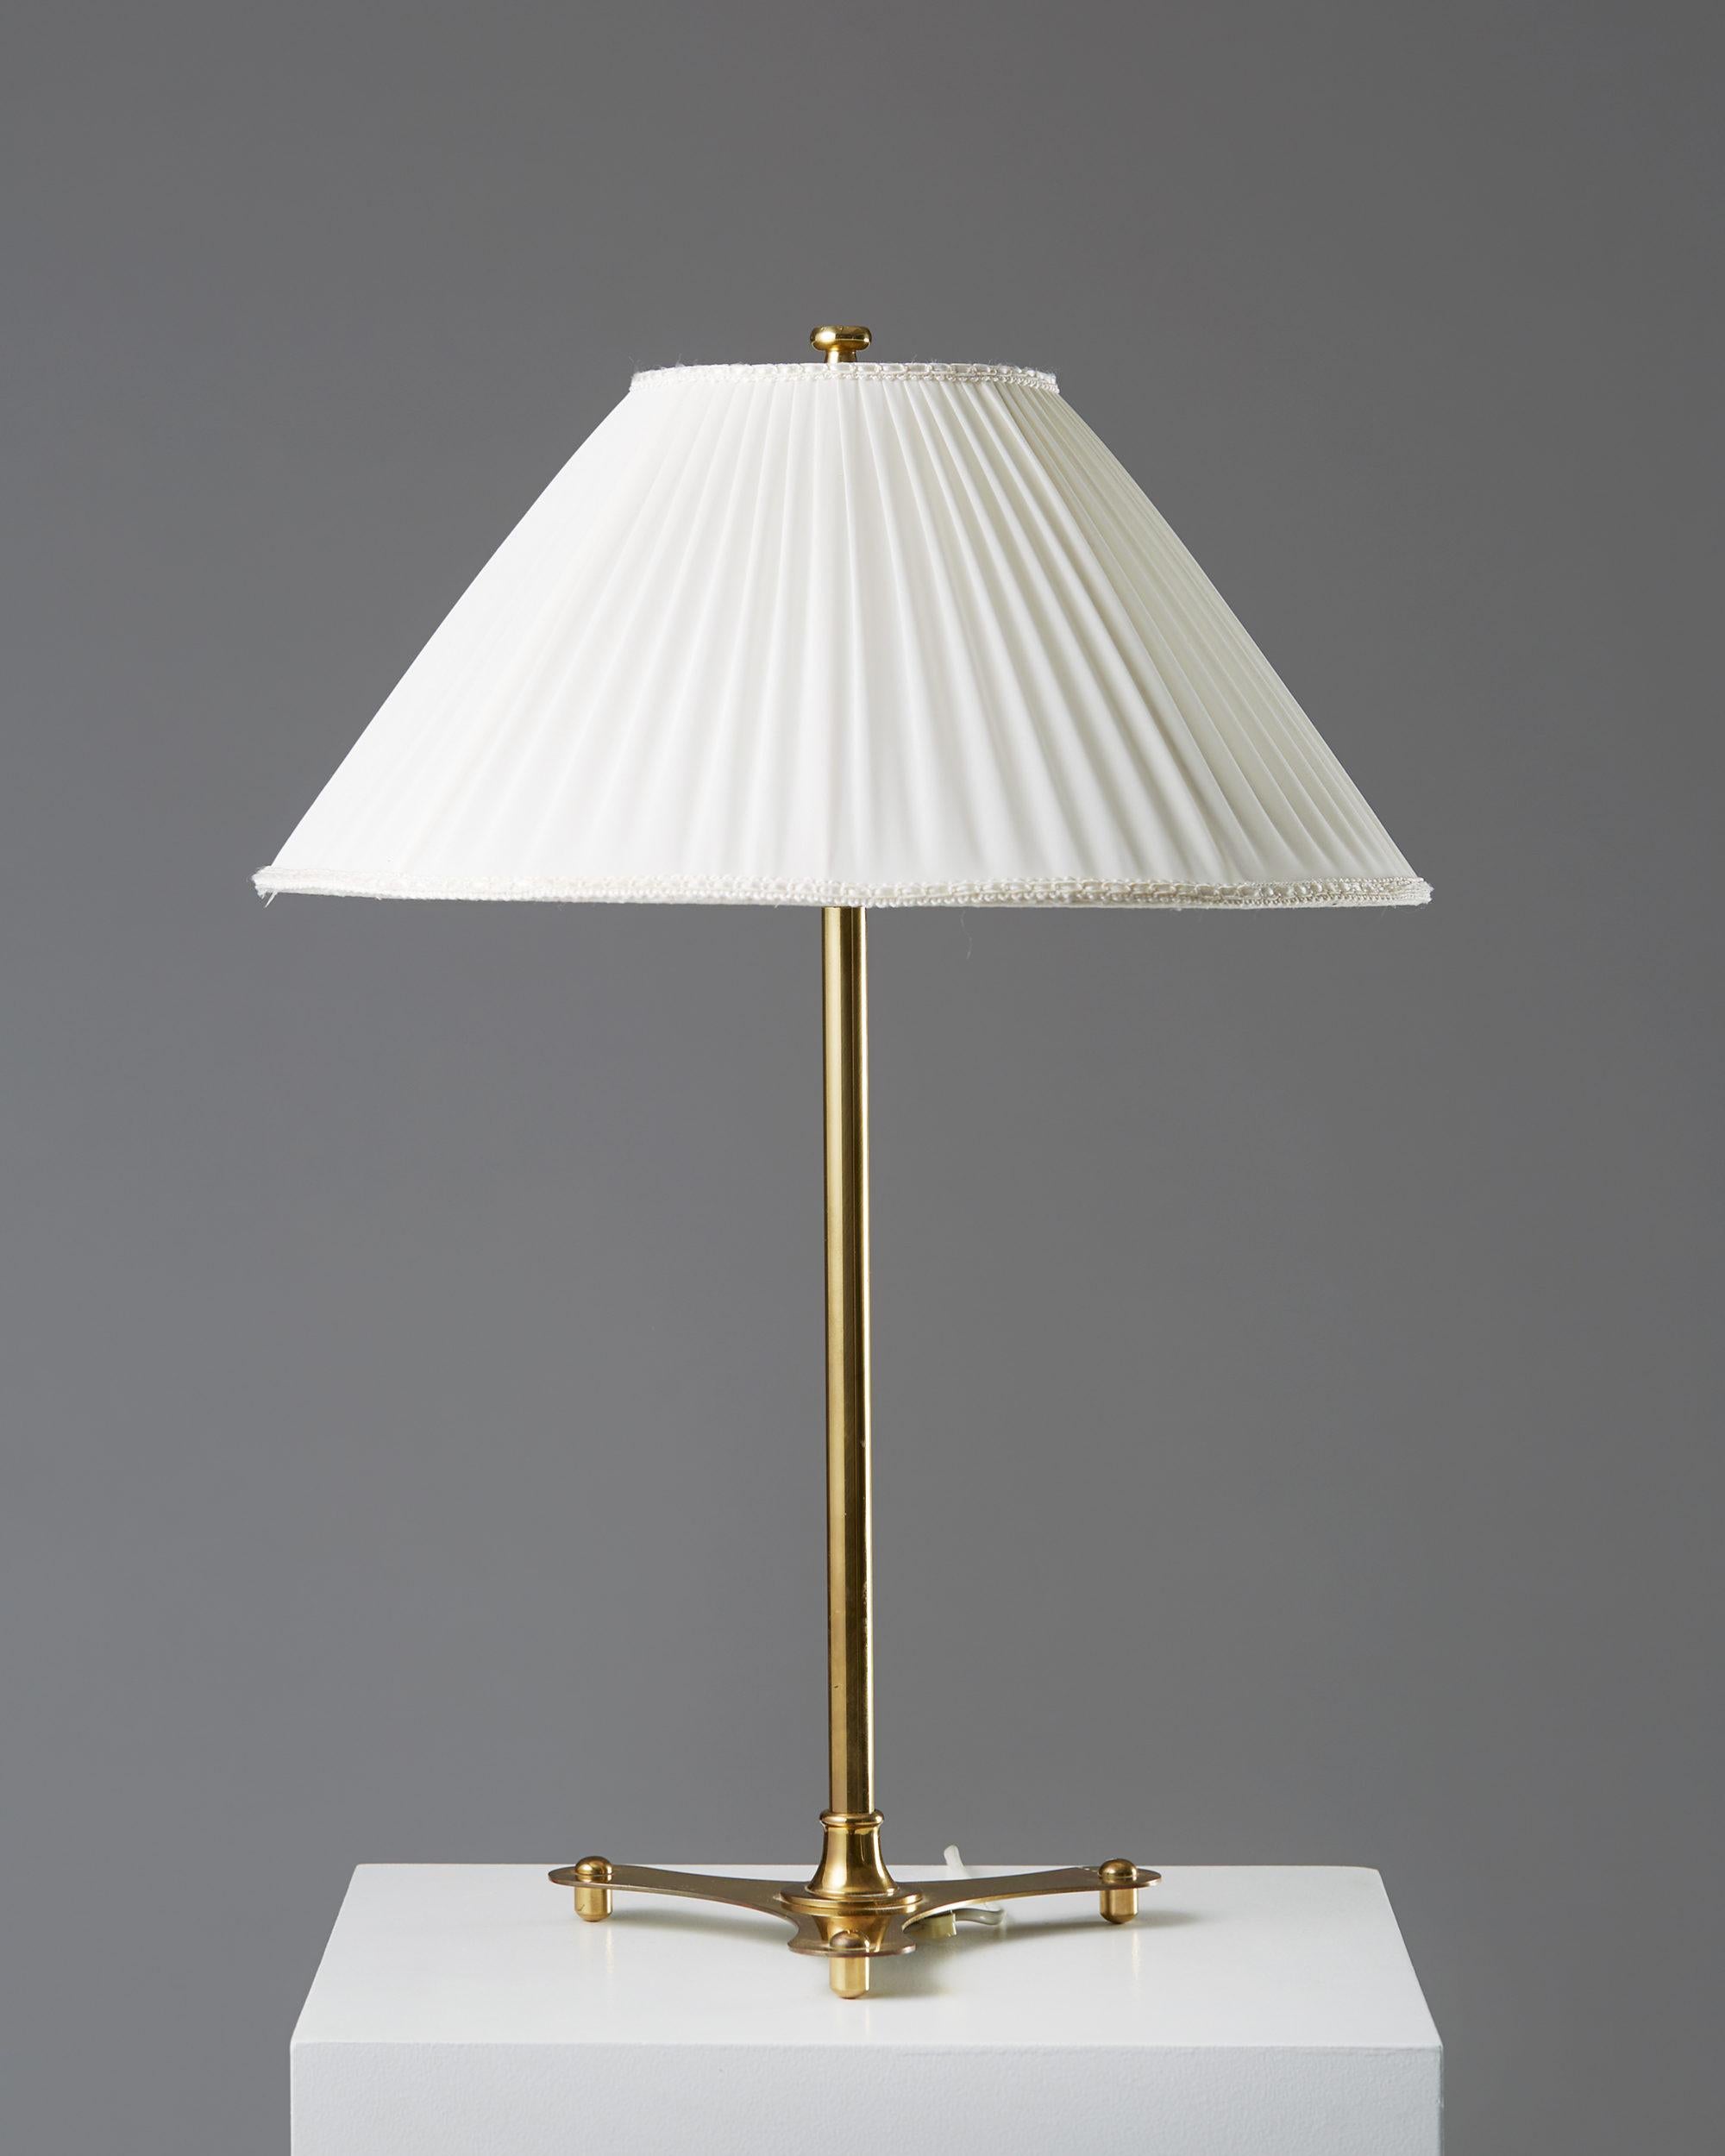 Brass and fabric shade.

Measures: H 57 cm/ 22 1/2